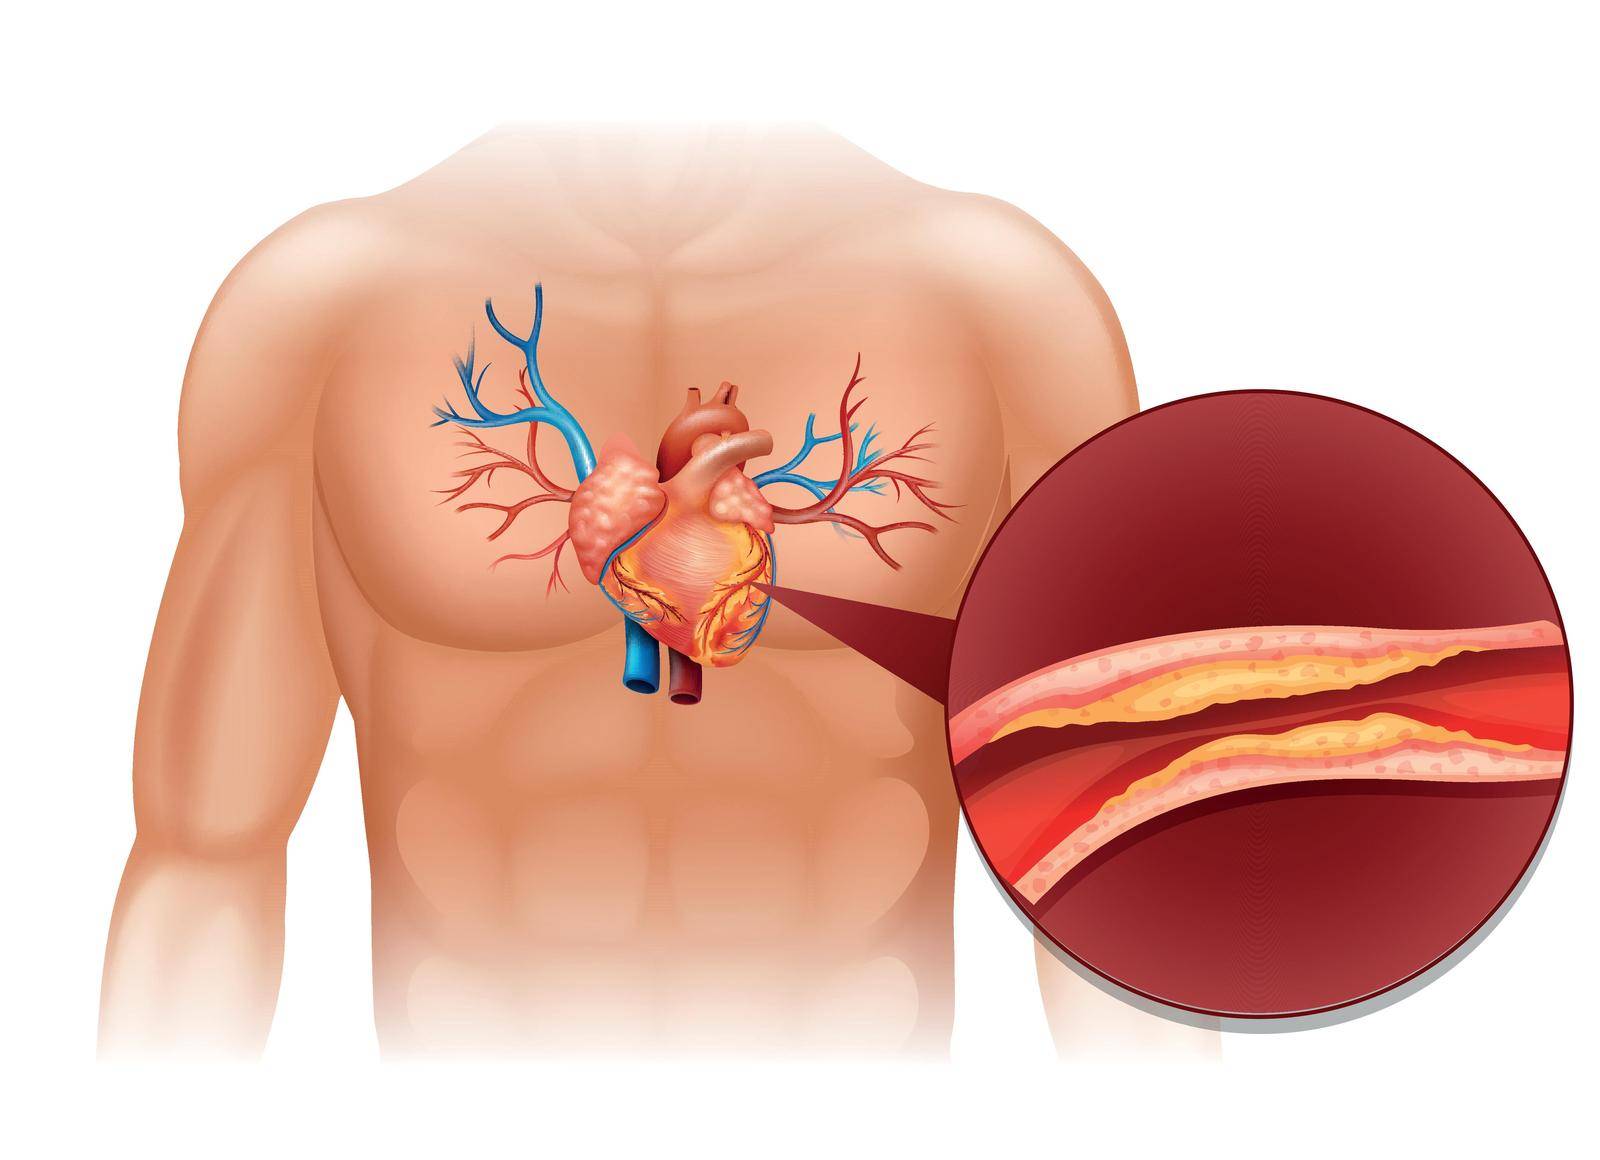 Heart Cholesteral in human body illustration